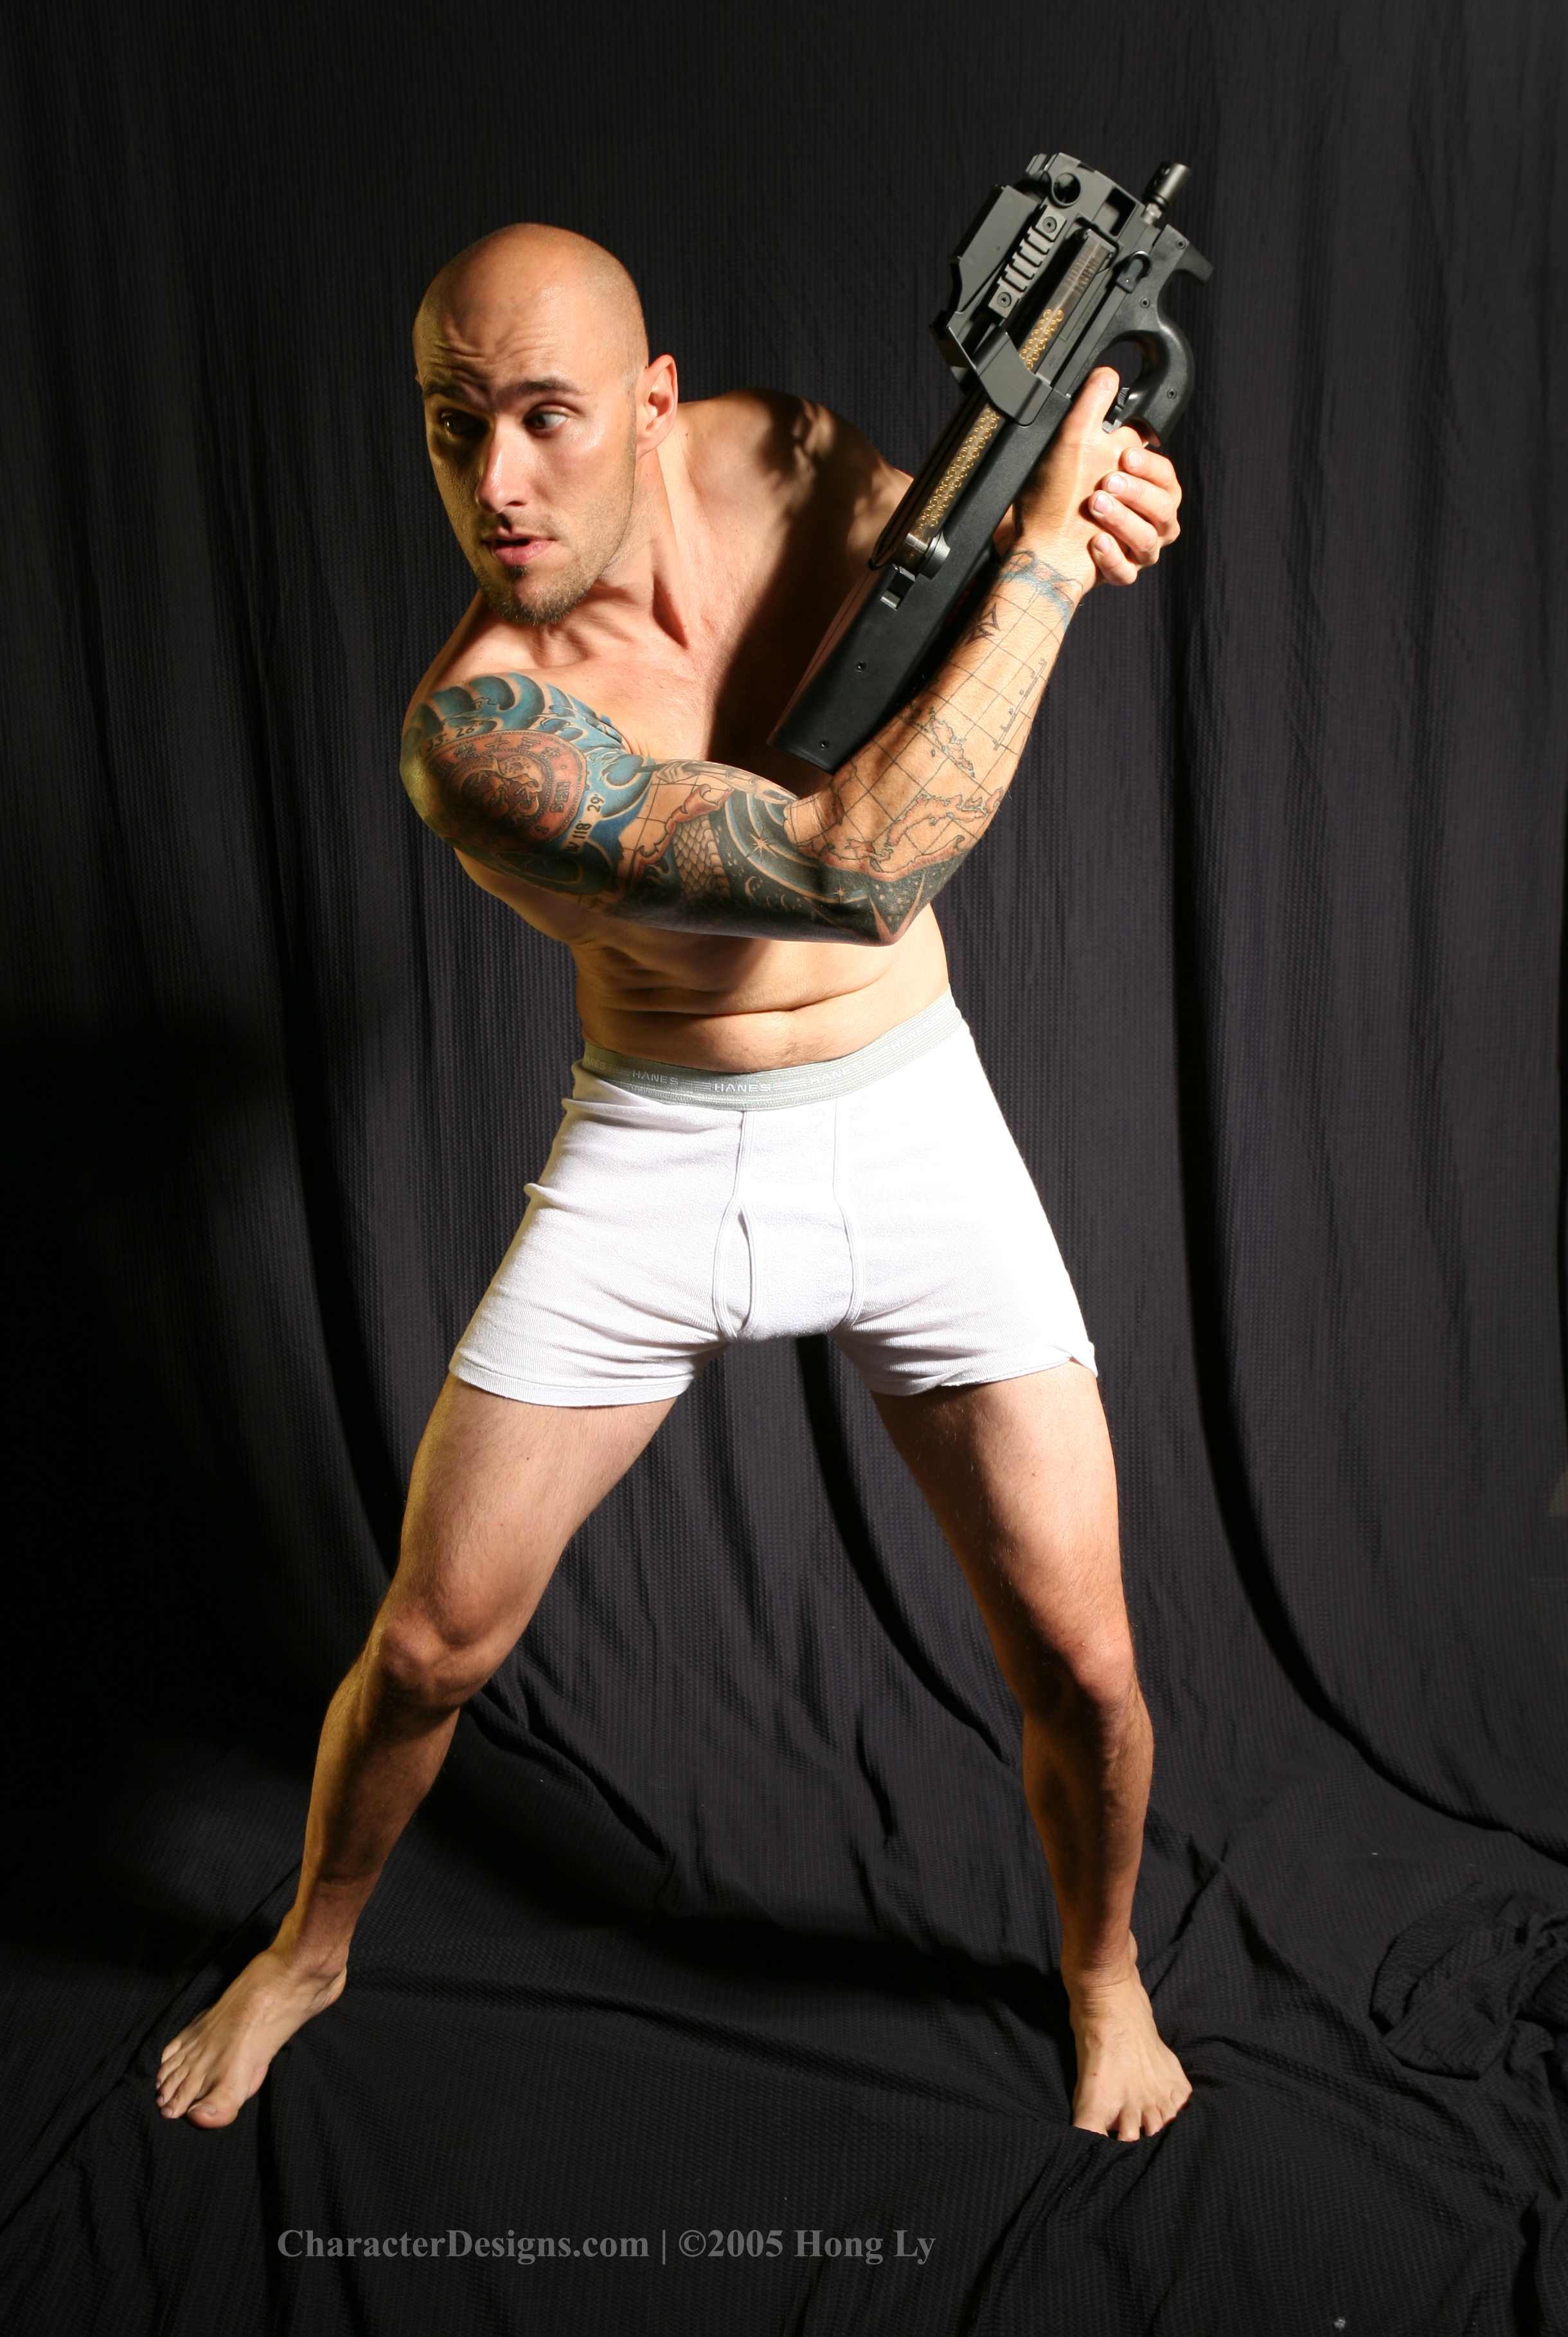 011 Gun Action Pose Male Model Characterdesigns Com Fashion model poses men casual 67+ new ideas. characterdesigns com